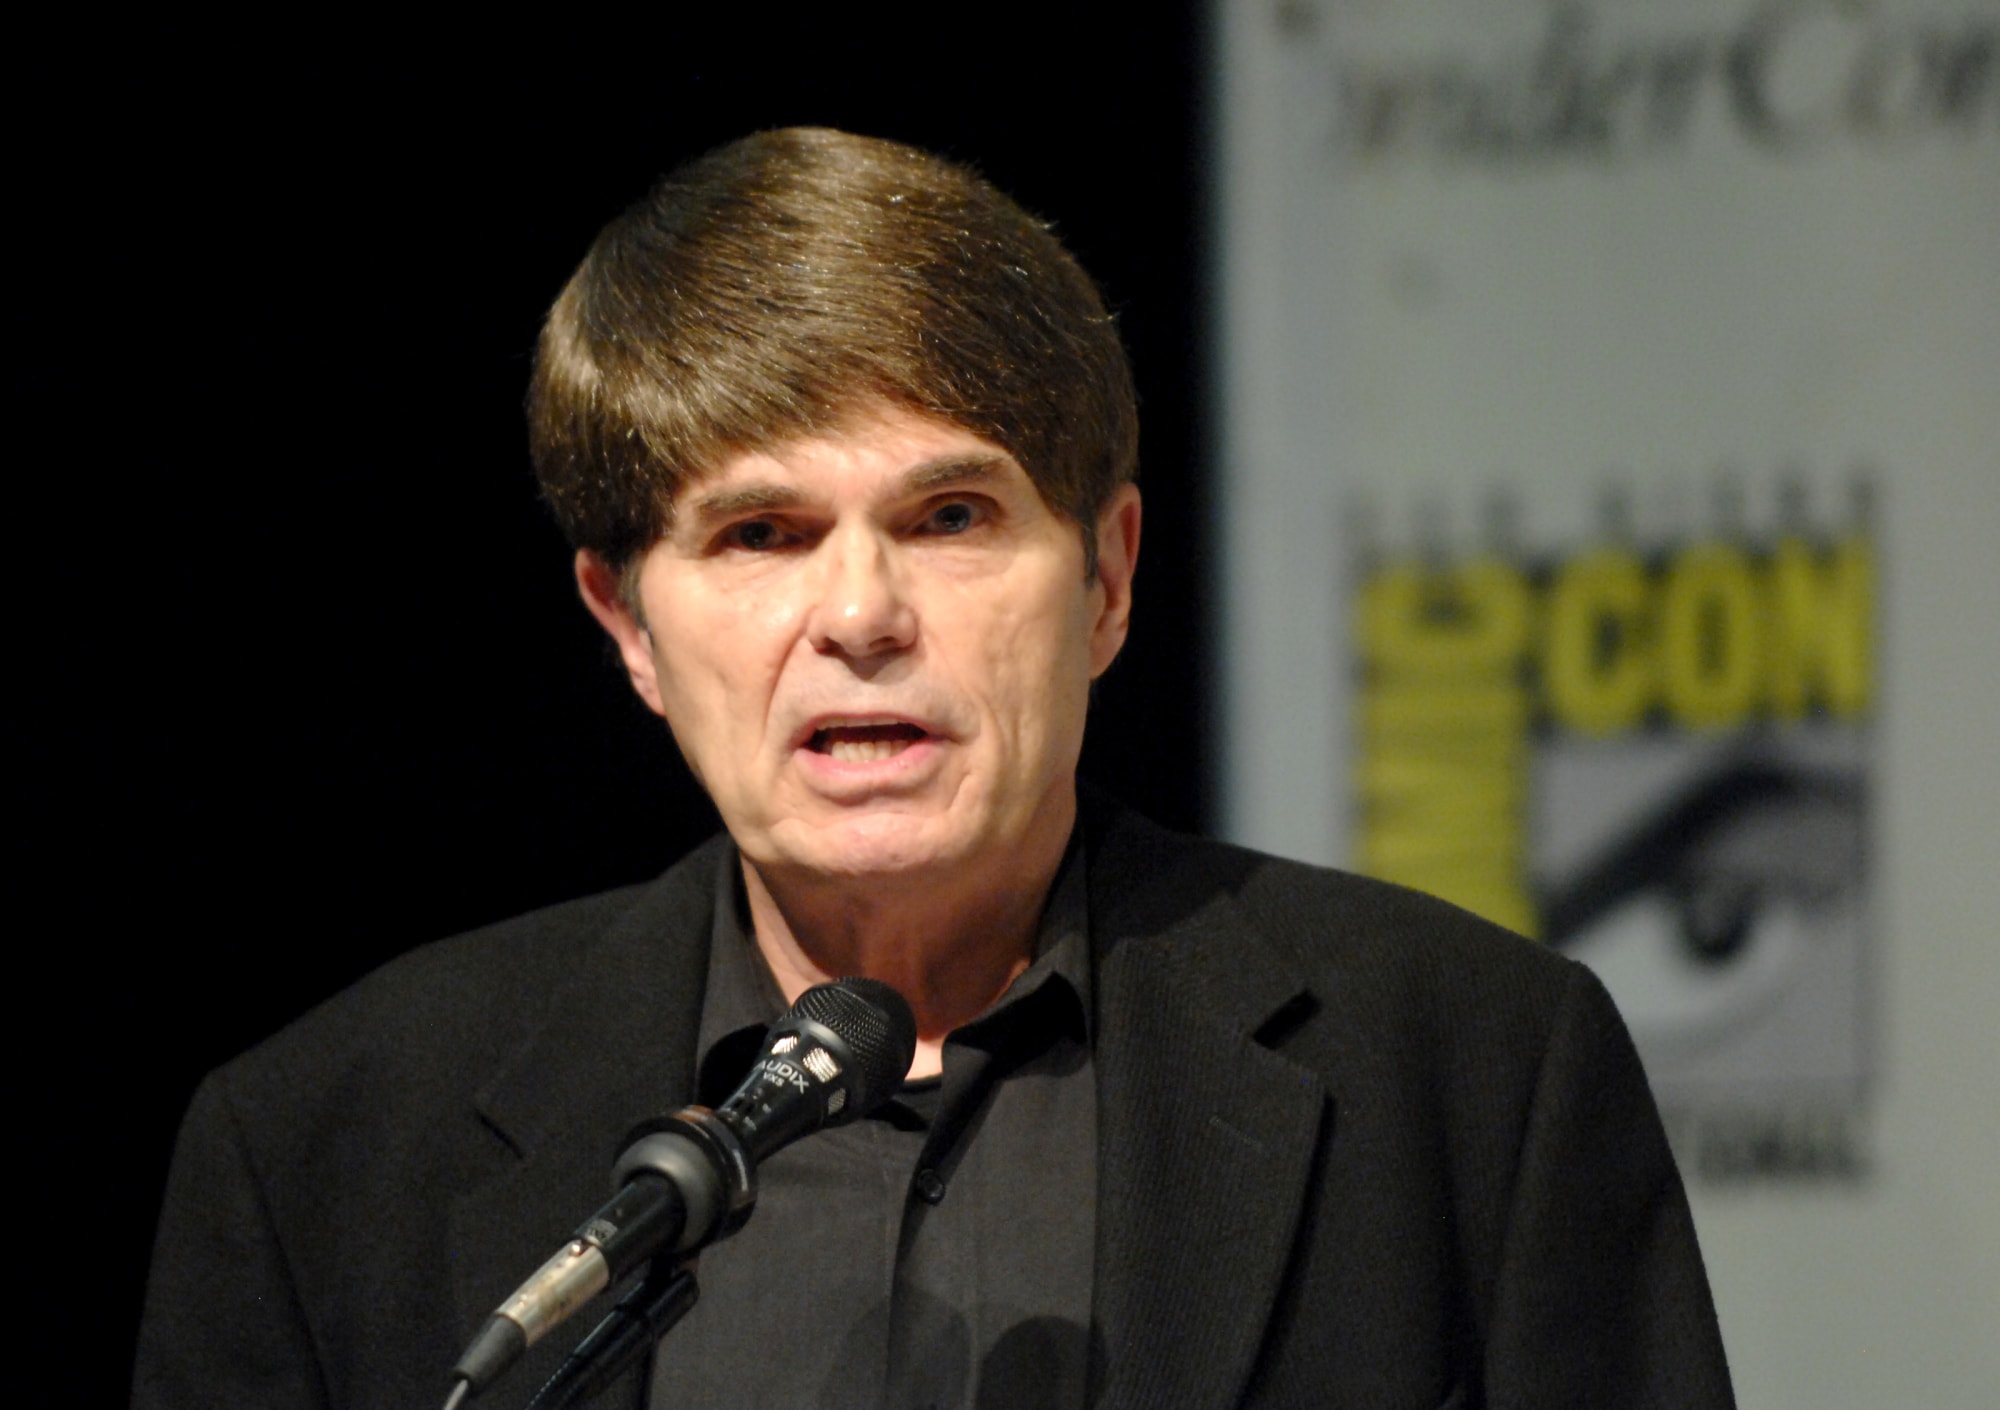 Dean Koontz on his newest novel and fame as an author